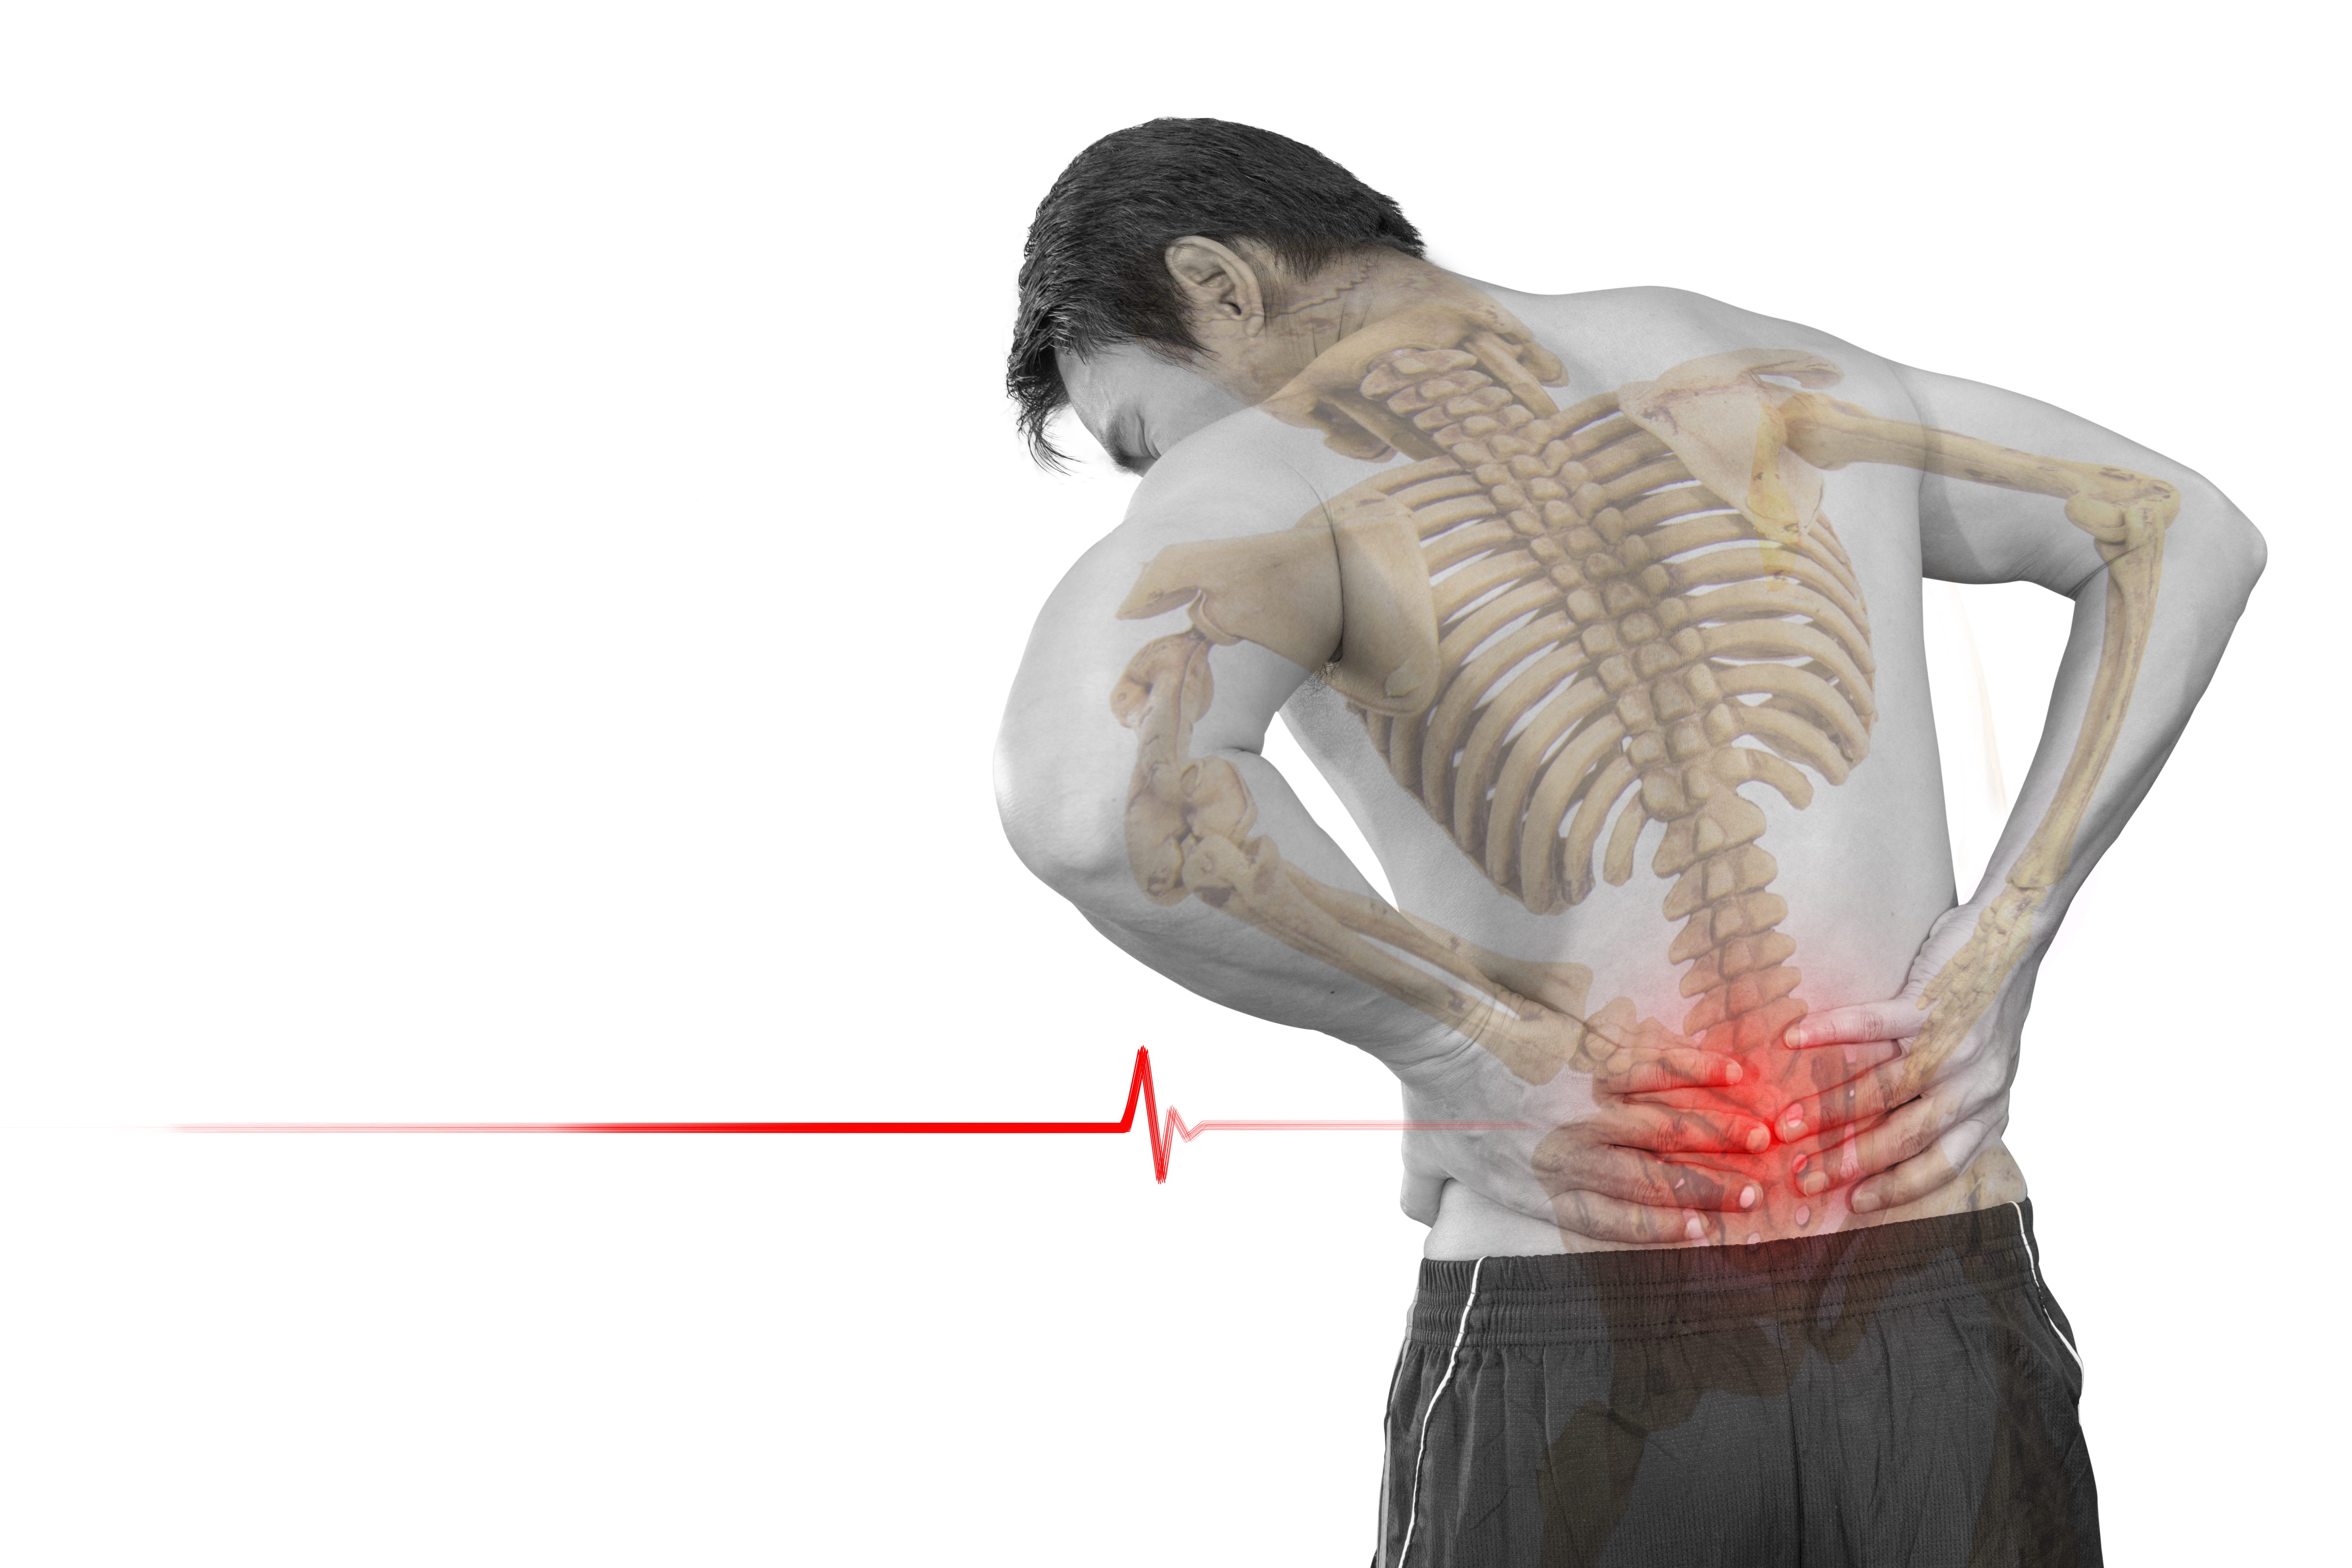 The Anatomy of Lower Back Pain, Low Back Pain